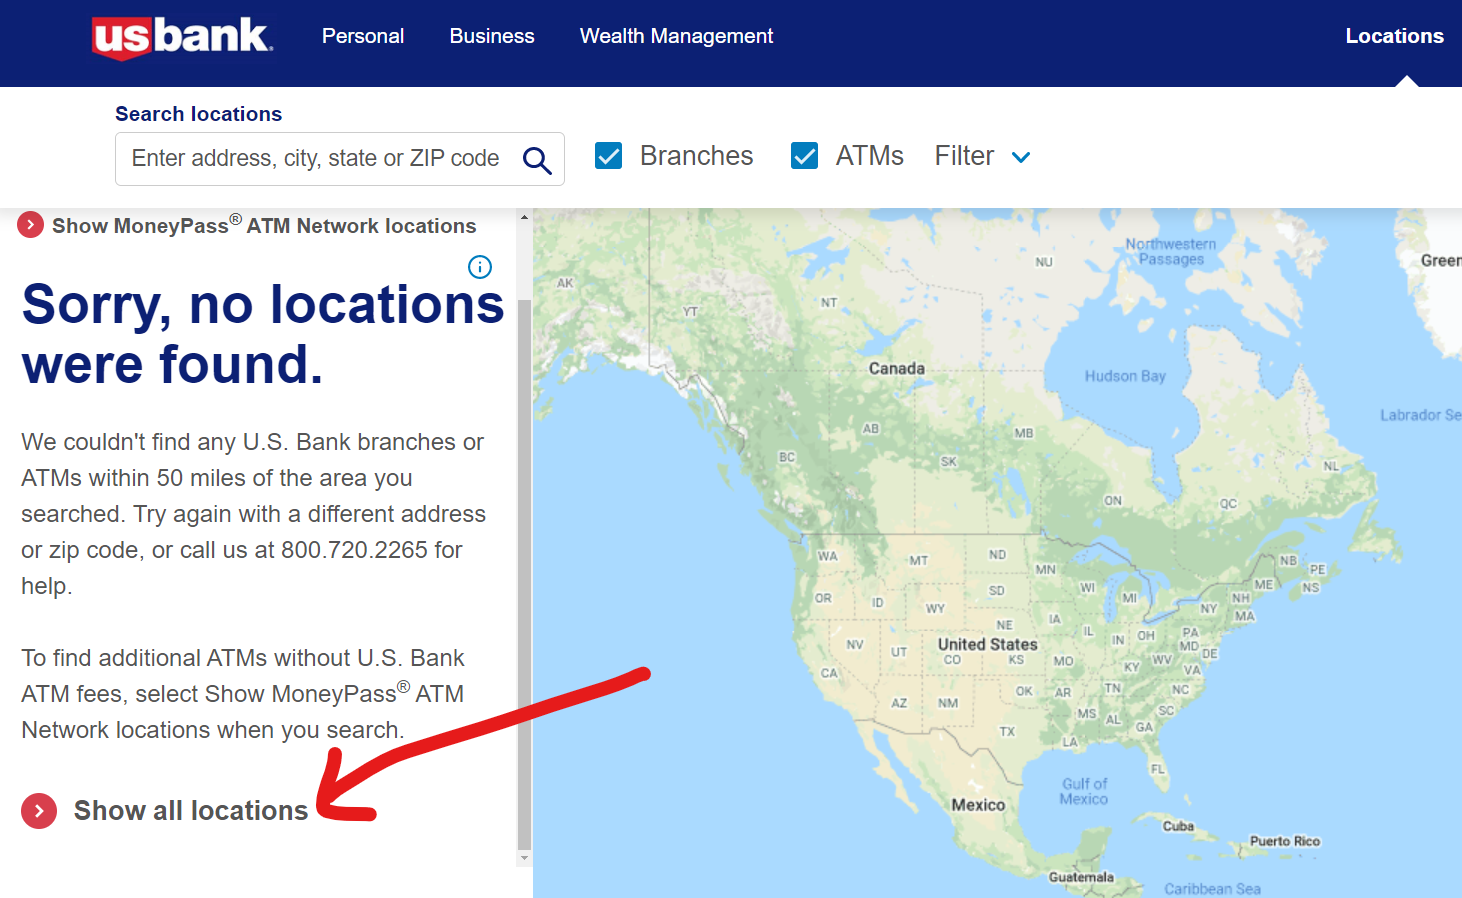 U.S. Bank Customer Service: Browse all the US Bank locations